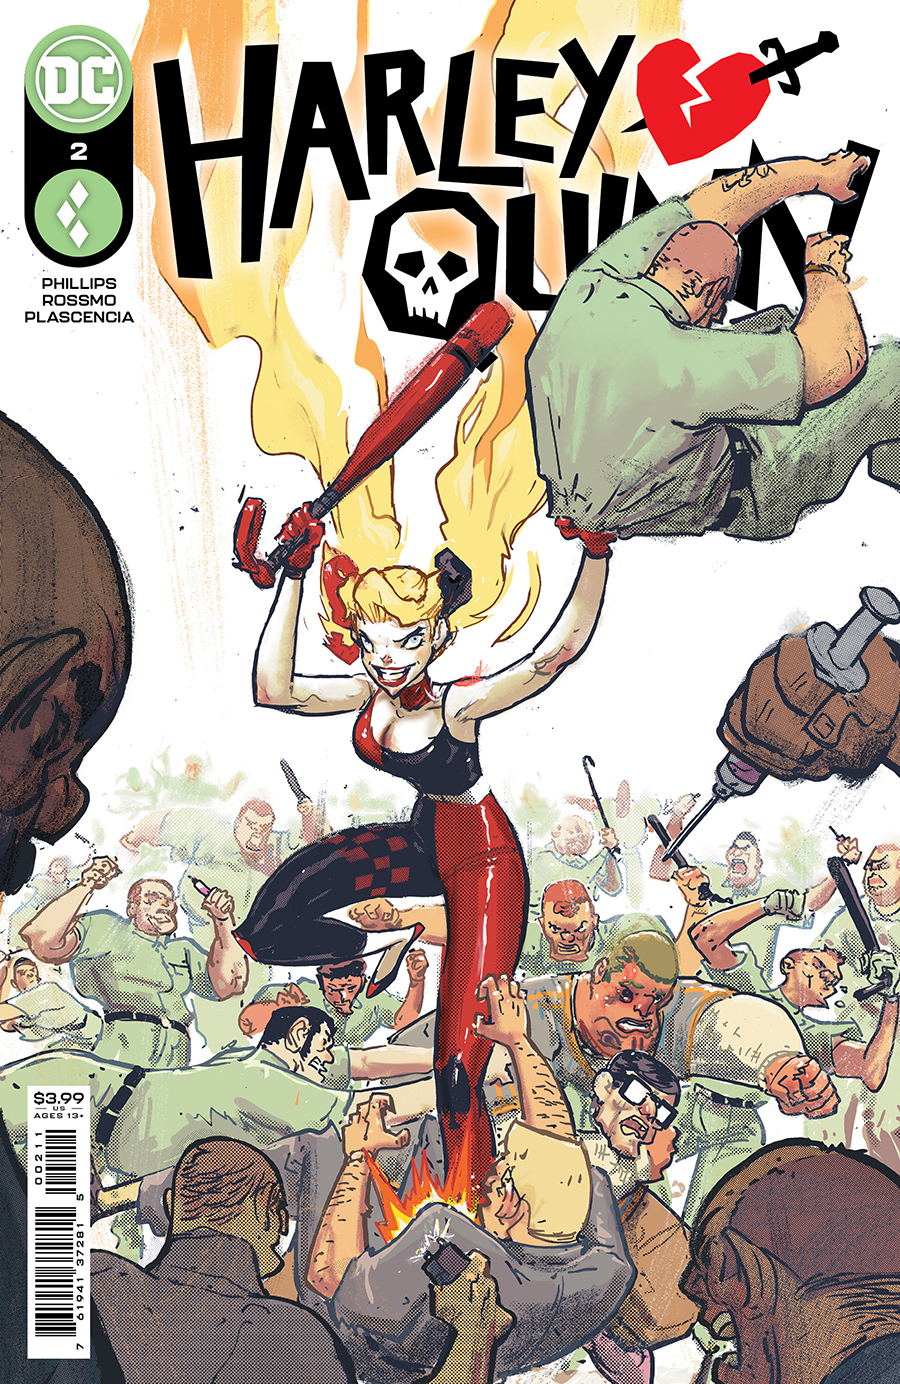 Harley Quinn #2 Cover A Riley Rossmo (2021)